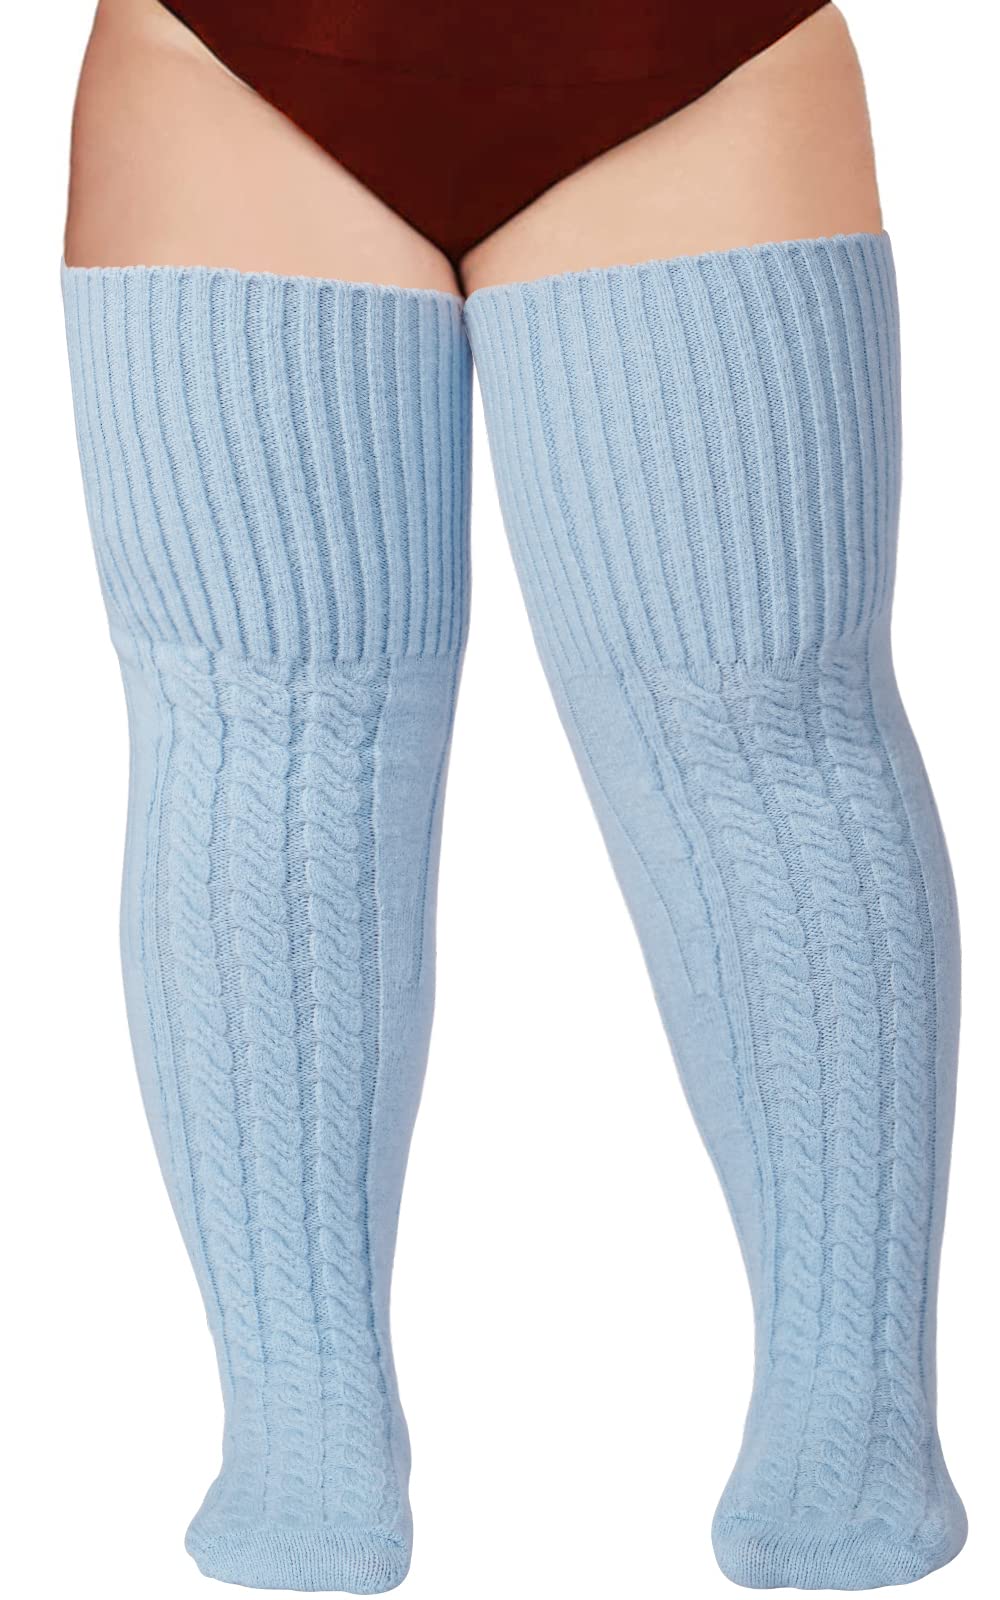 Wool Plus Size Thigh High Socks For Thick Thighs-Baby Blue - Moon Wood